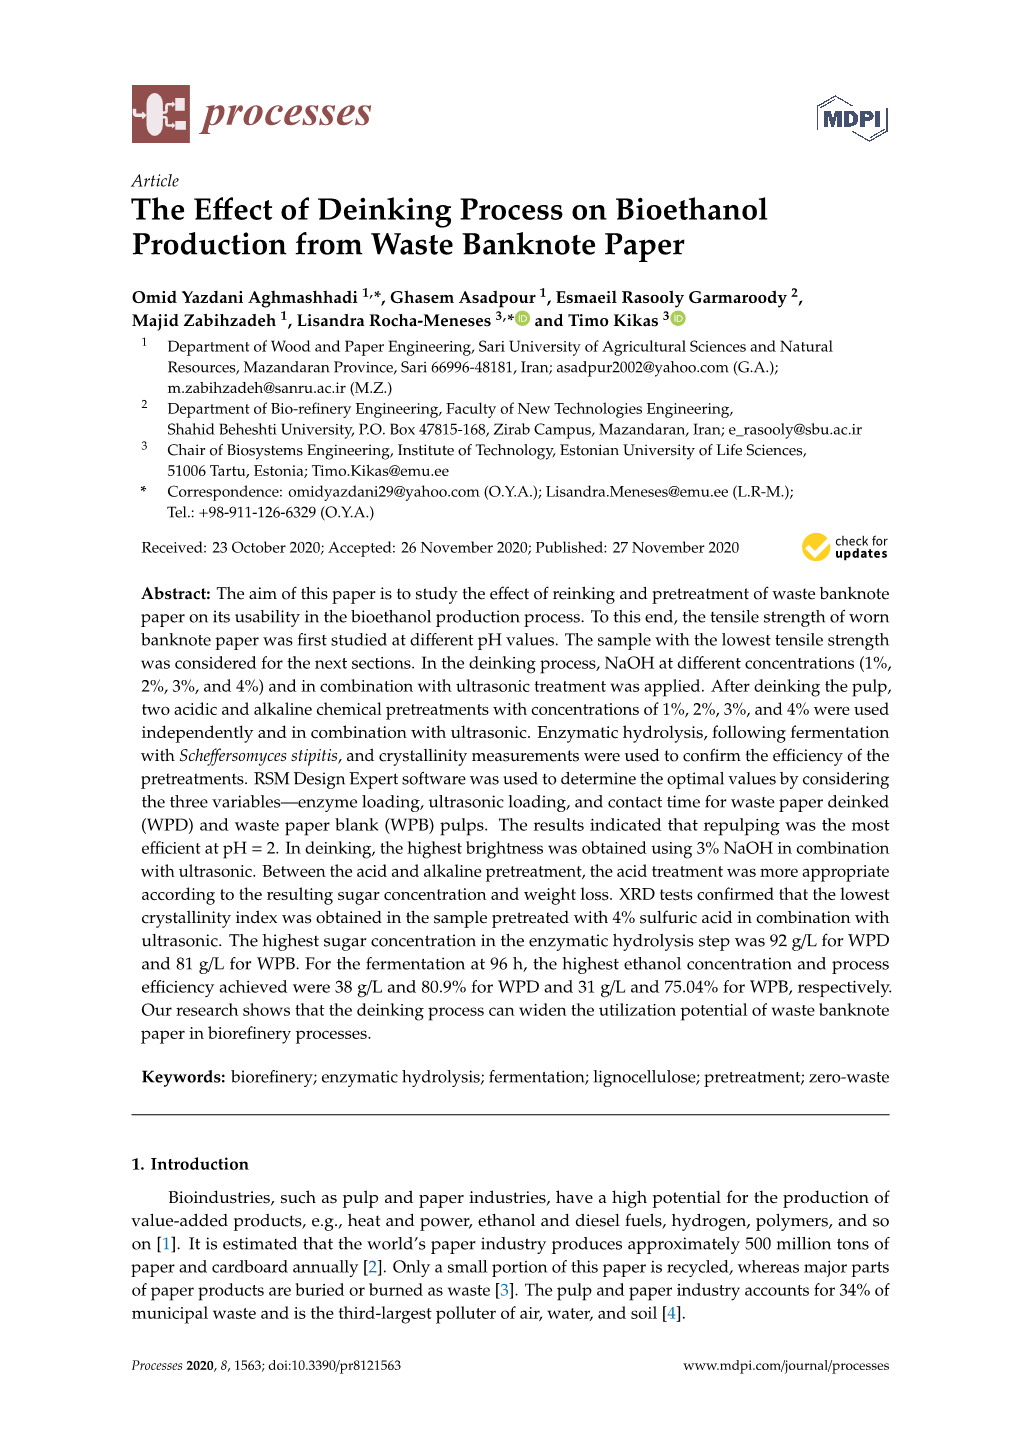 The Effect of Deinking Process on Bioethanol Production from Waste